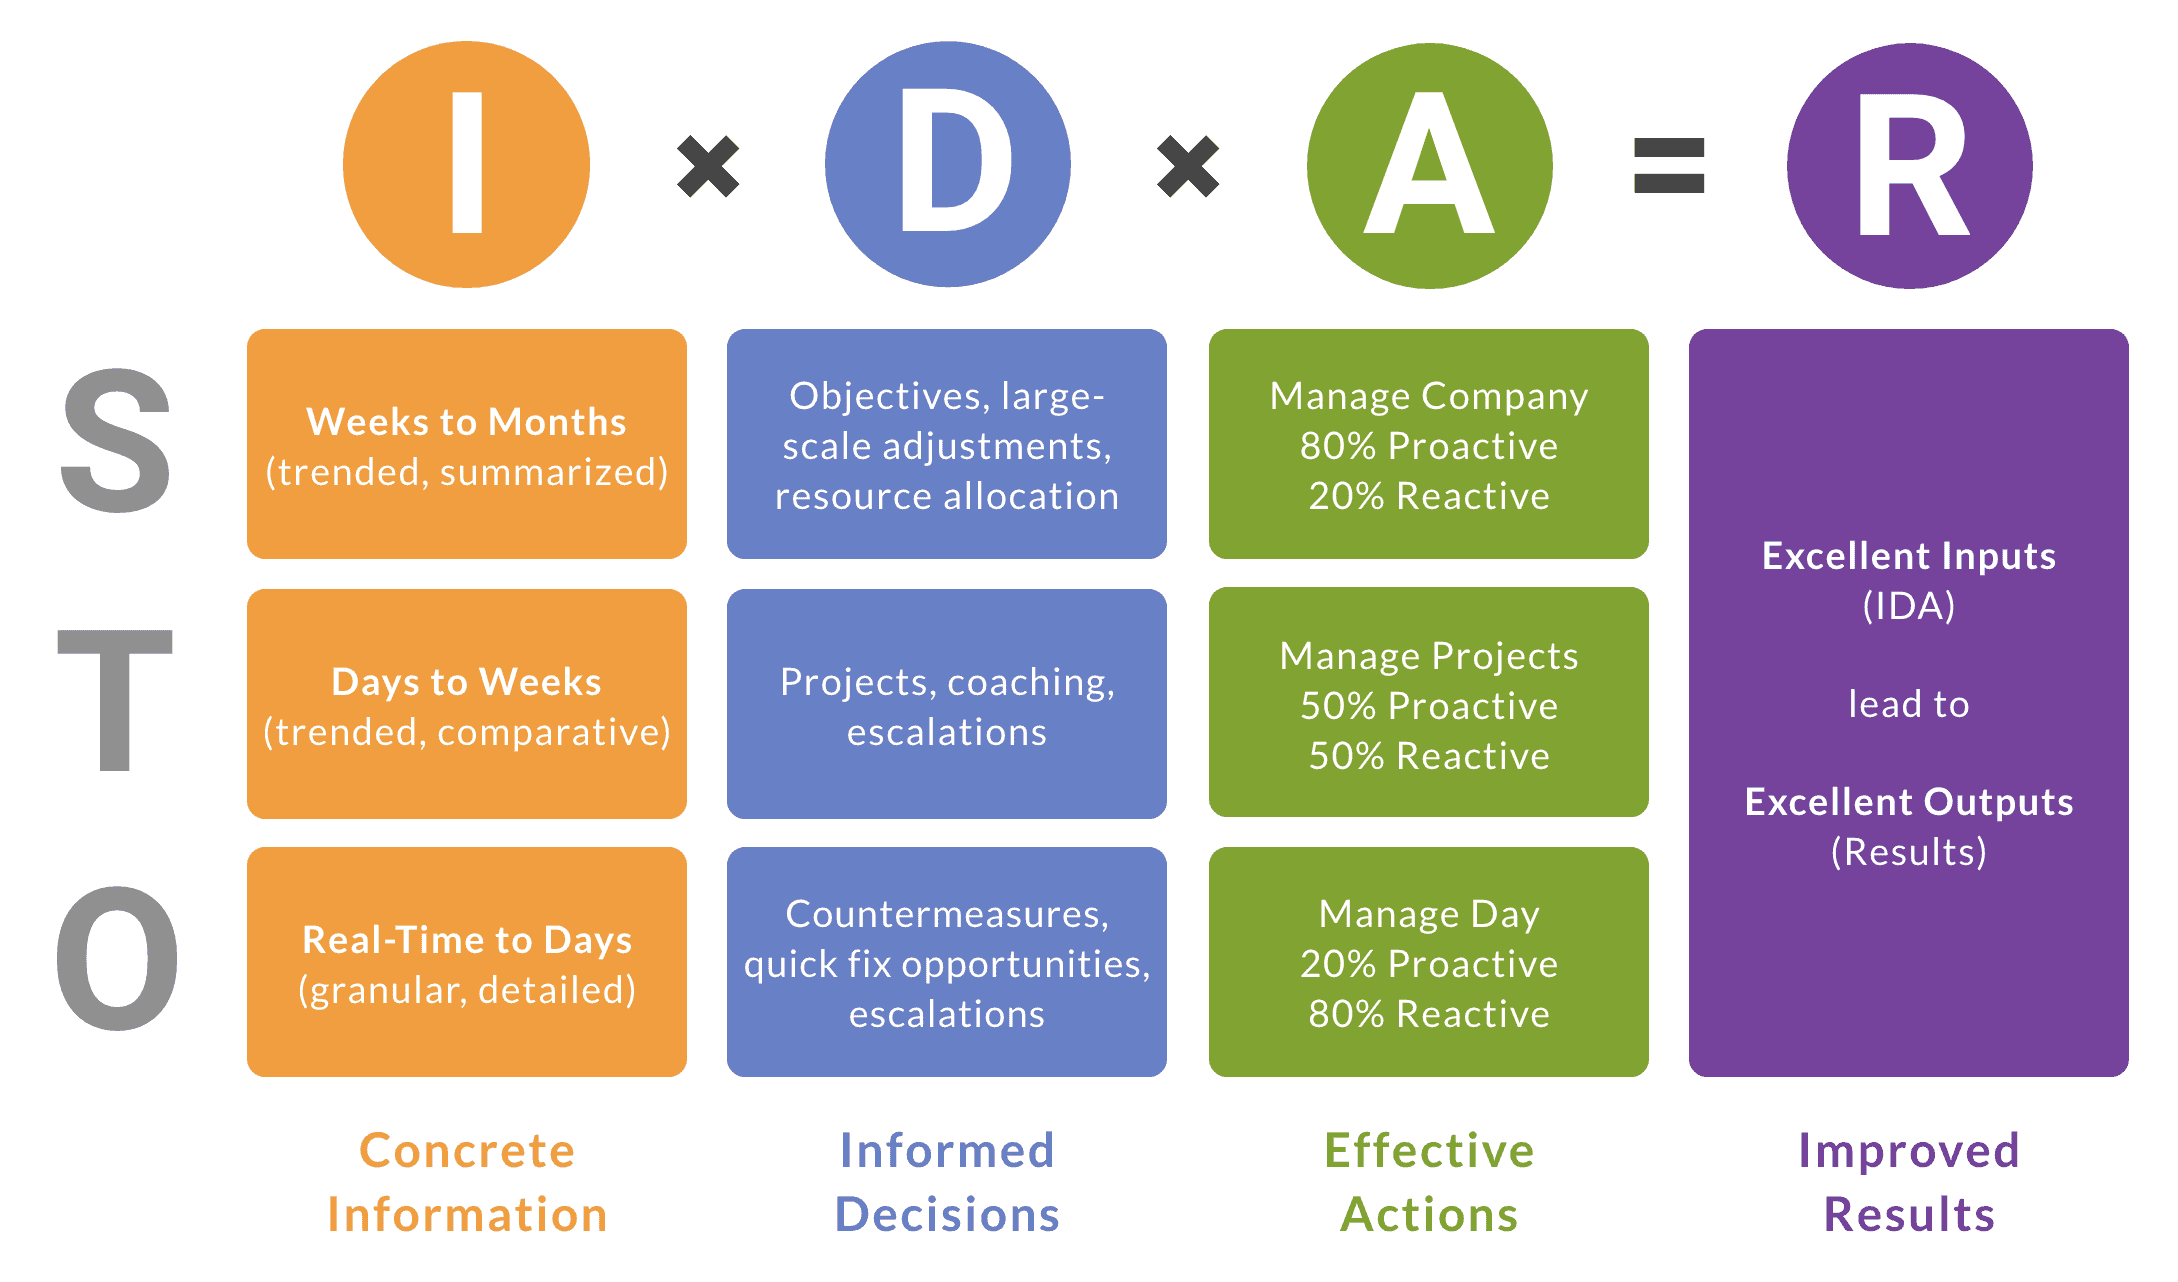 Infographic showing the IDA equation and tactics for acheiving each step of the equation.